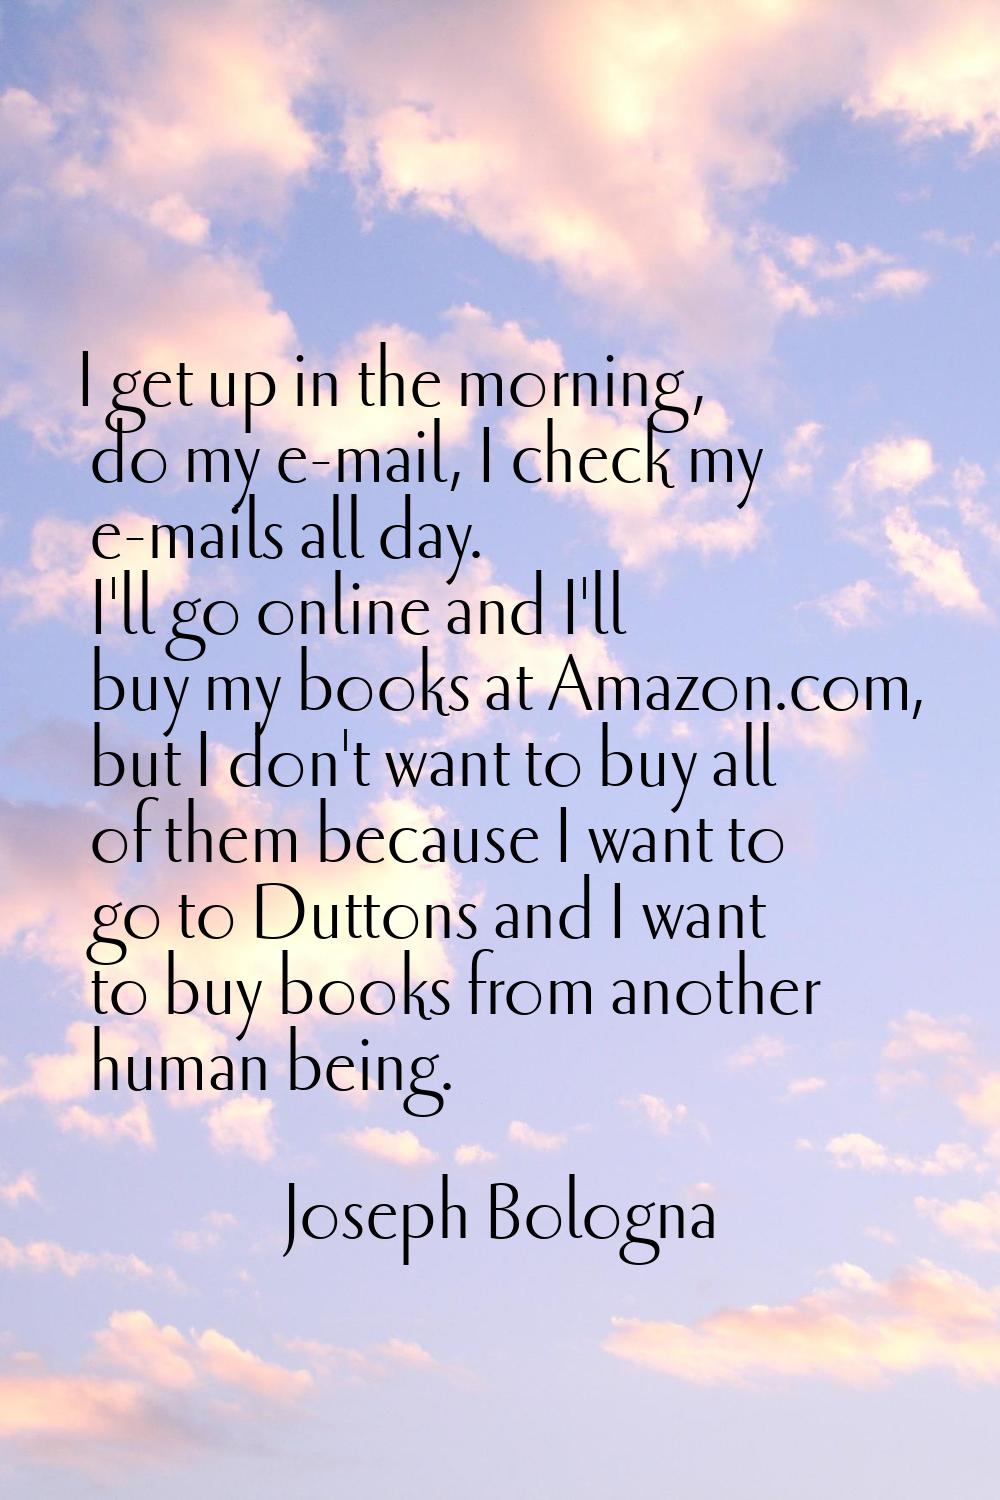 I get up in the morning, do my e-mail, I check my e-mails all day. I'll go online and I'll buy my b